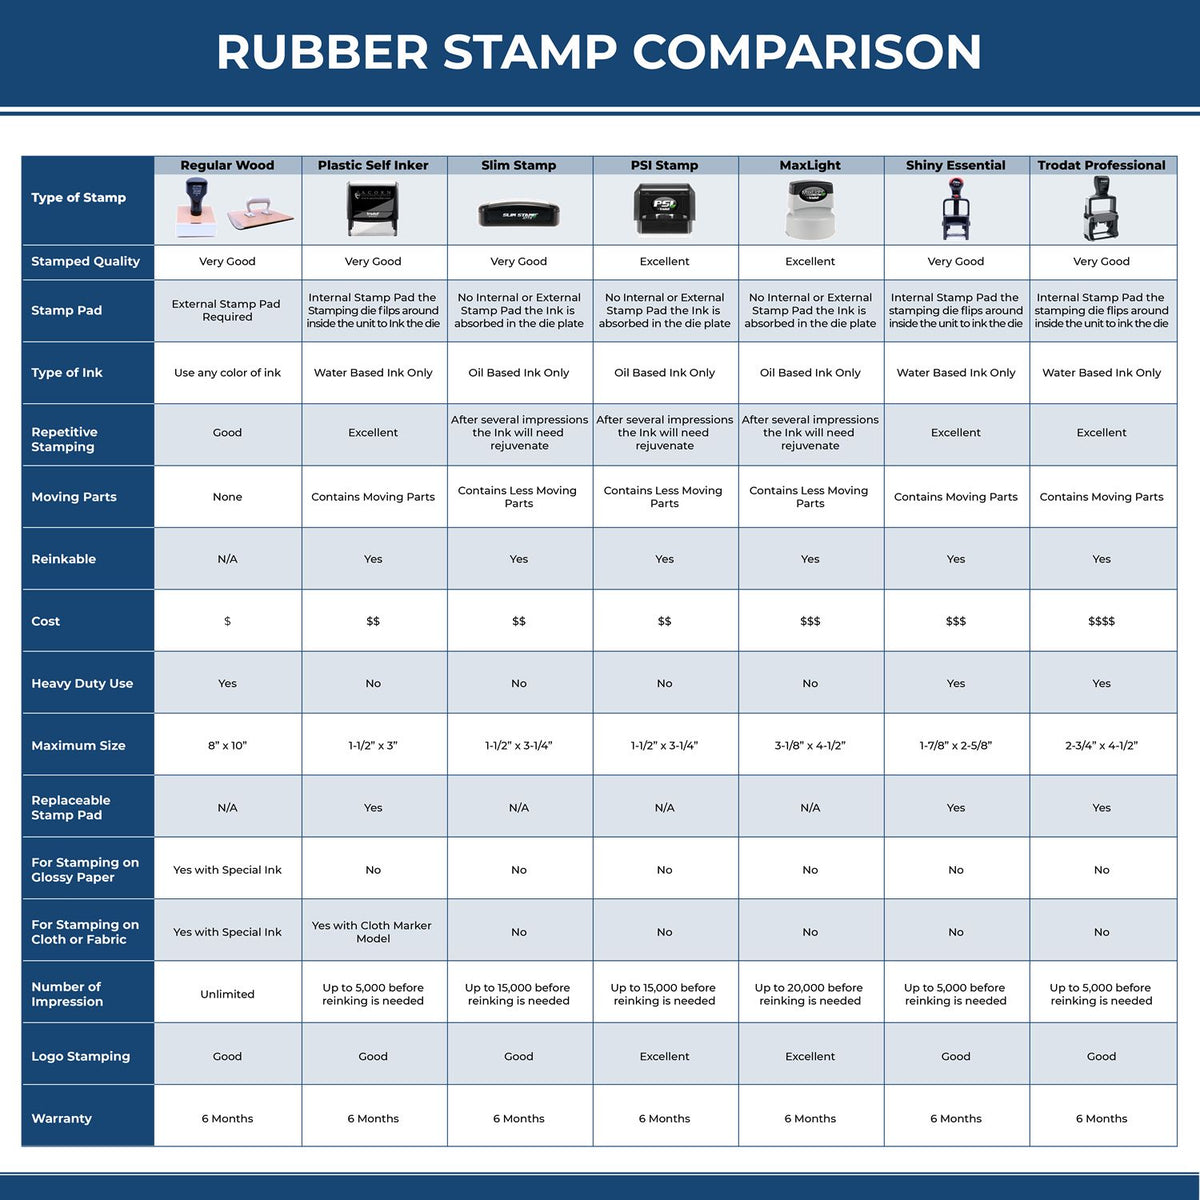 A comparison chart for the different types of mount models available for the Heavy-Duty New York Rectangular Notary Stamp.